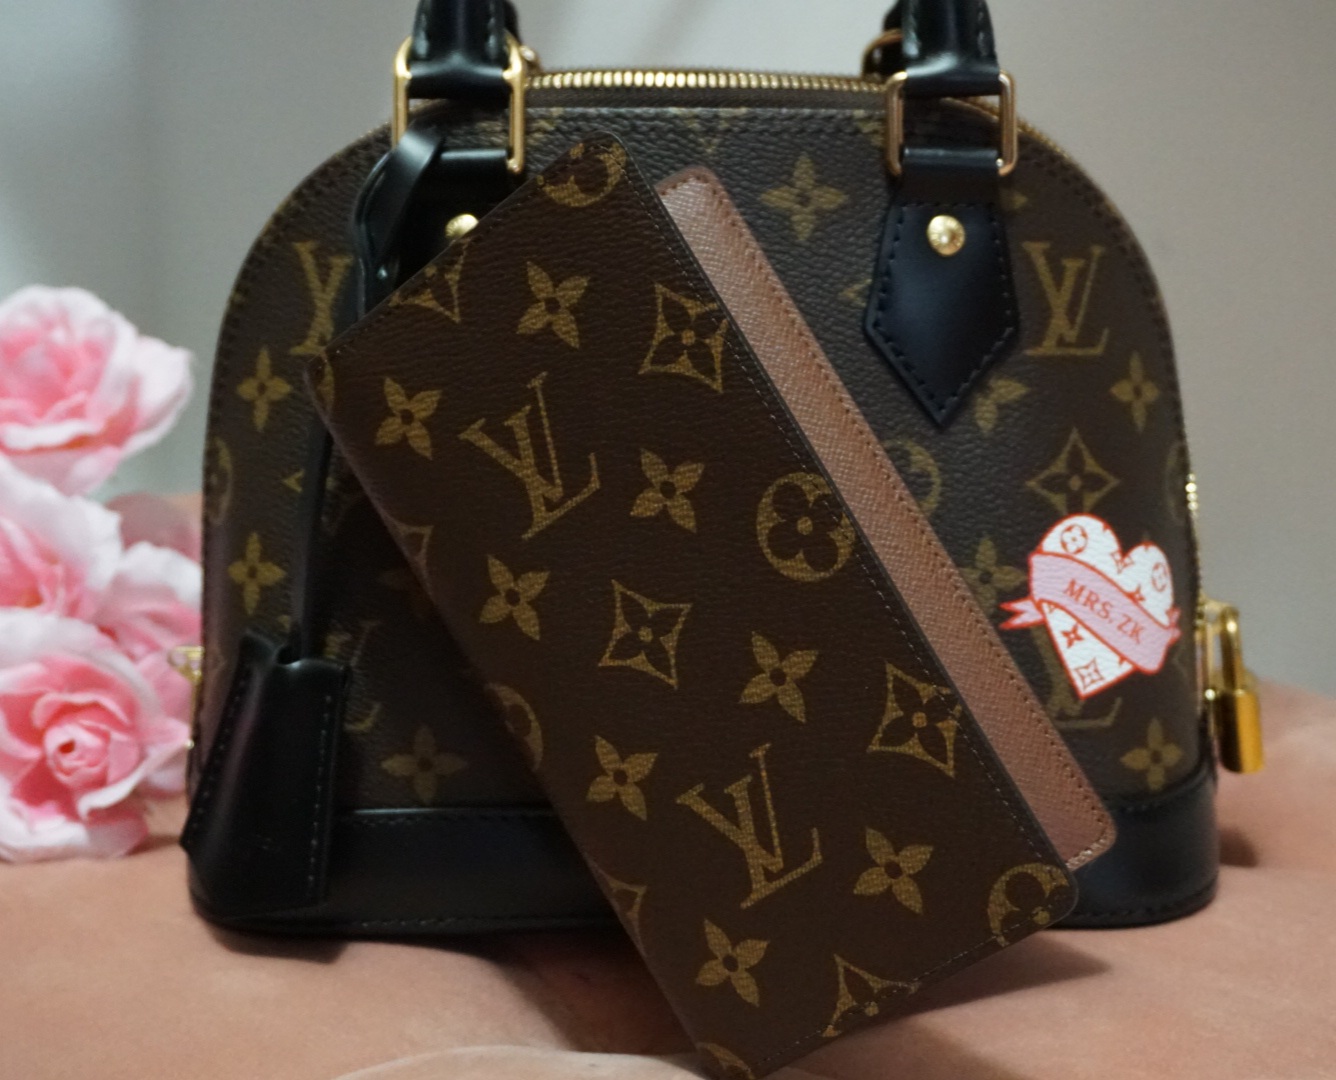 What's Your Agenda? Ft. My First Louis Vuitton SLG, Haul